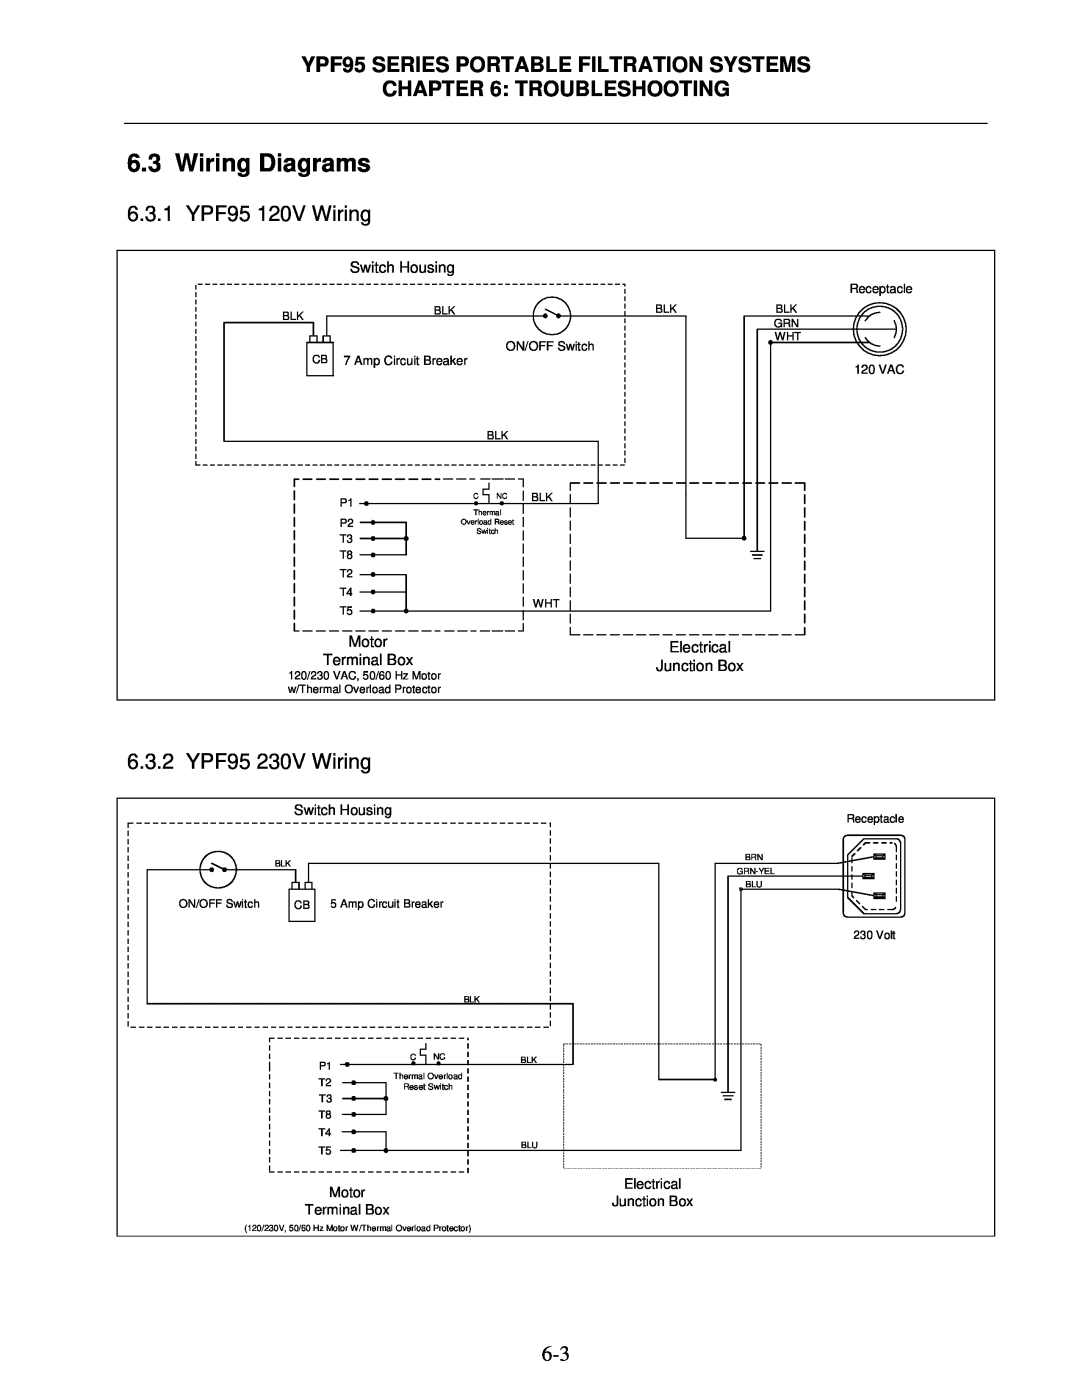 Frymaster Wiring Diagrams, YPF95 SERIES PORTABLE FILTRATION SYSTEMS, Troubleshooting, Switch Housing, Motor, Electrical 